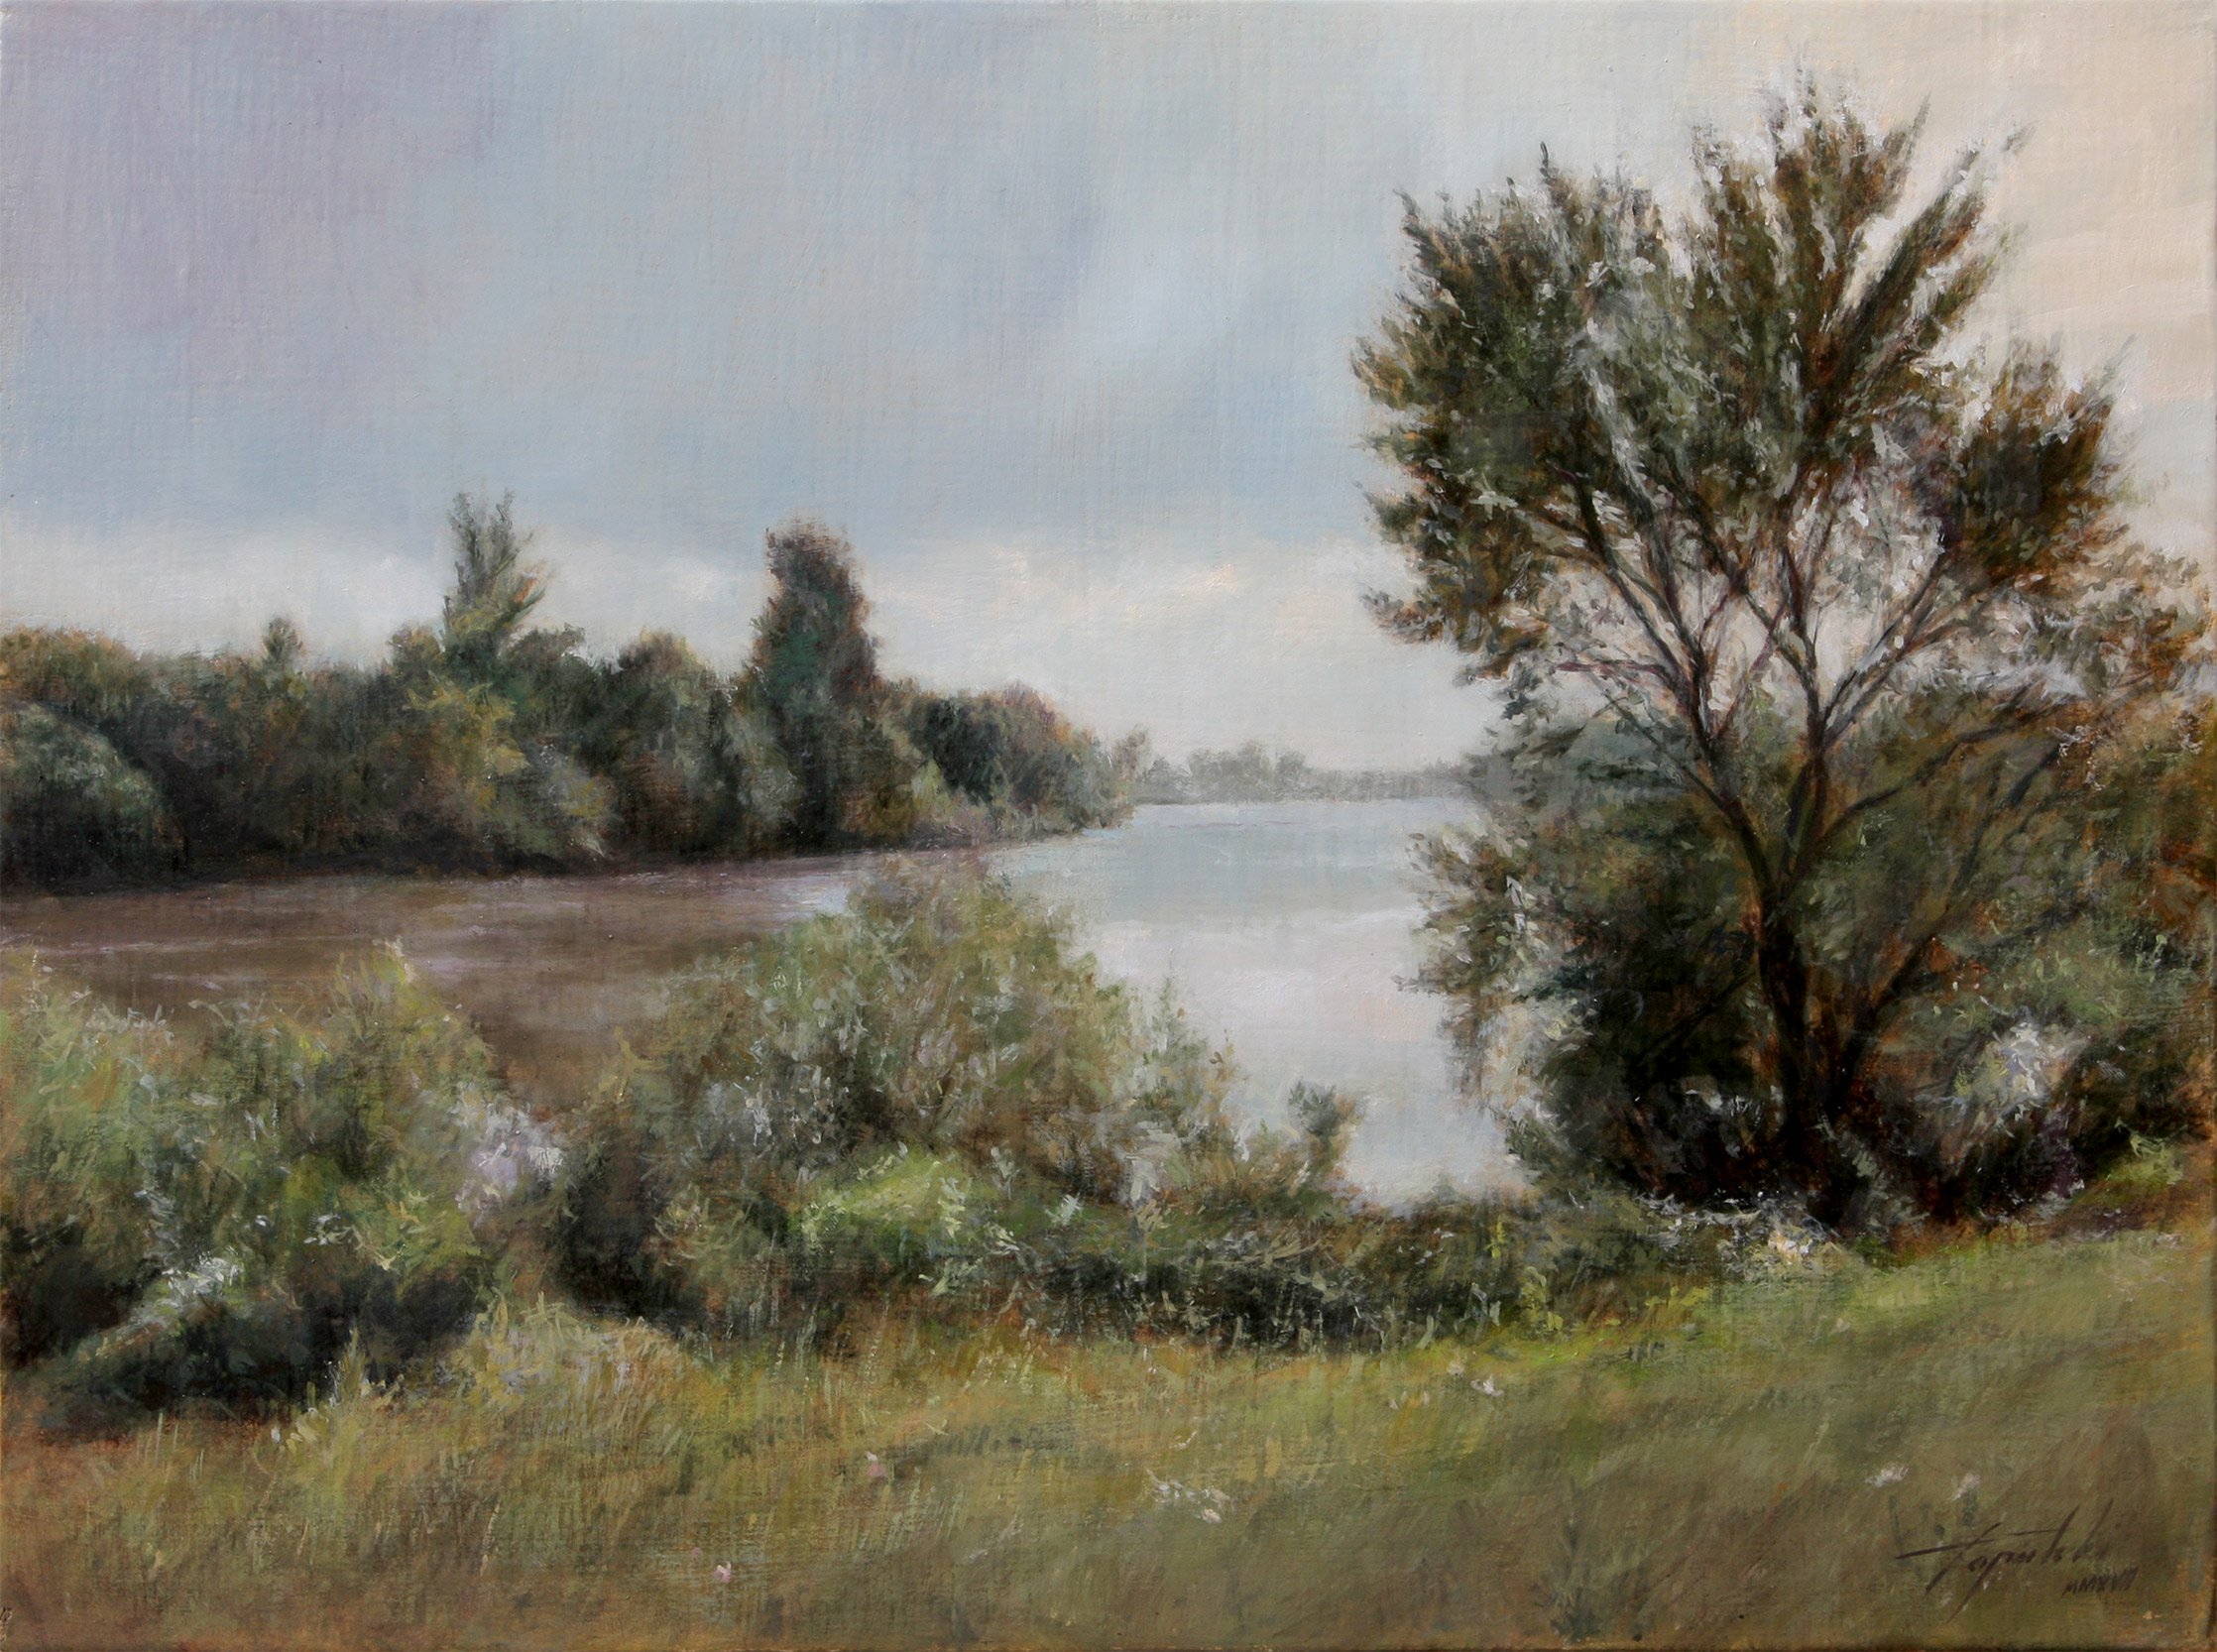 By The River Landscape Oil Painting Fine Arts Gallery Original